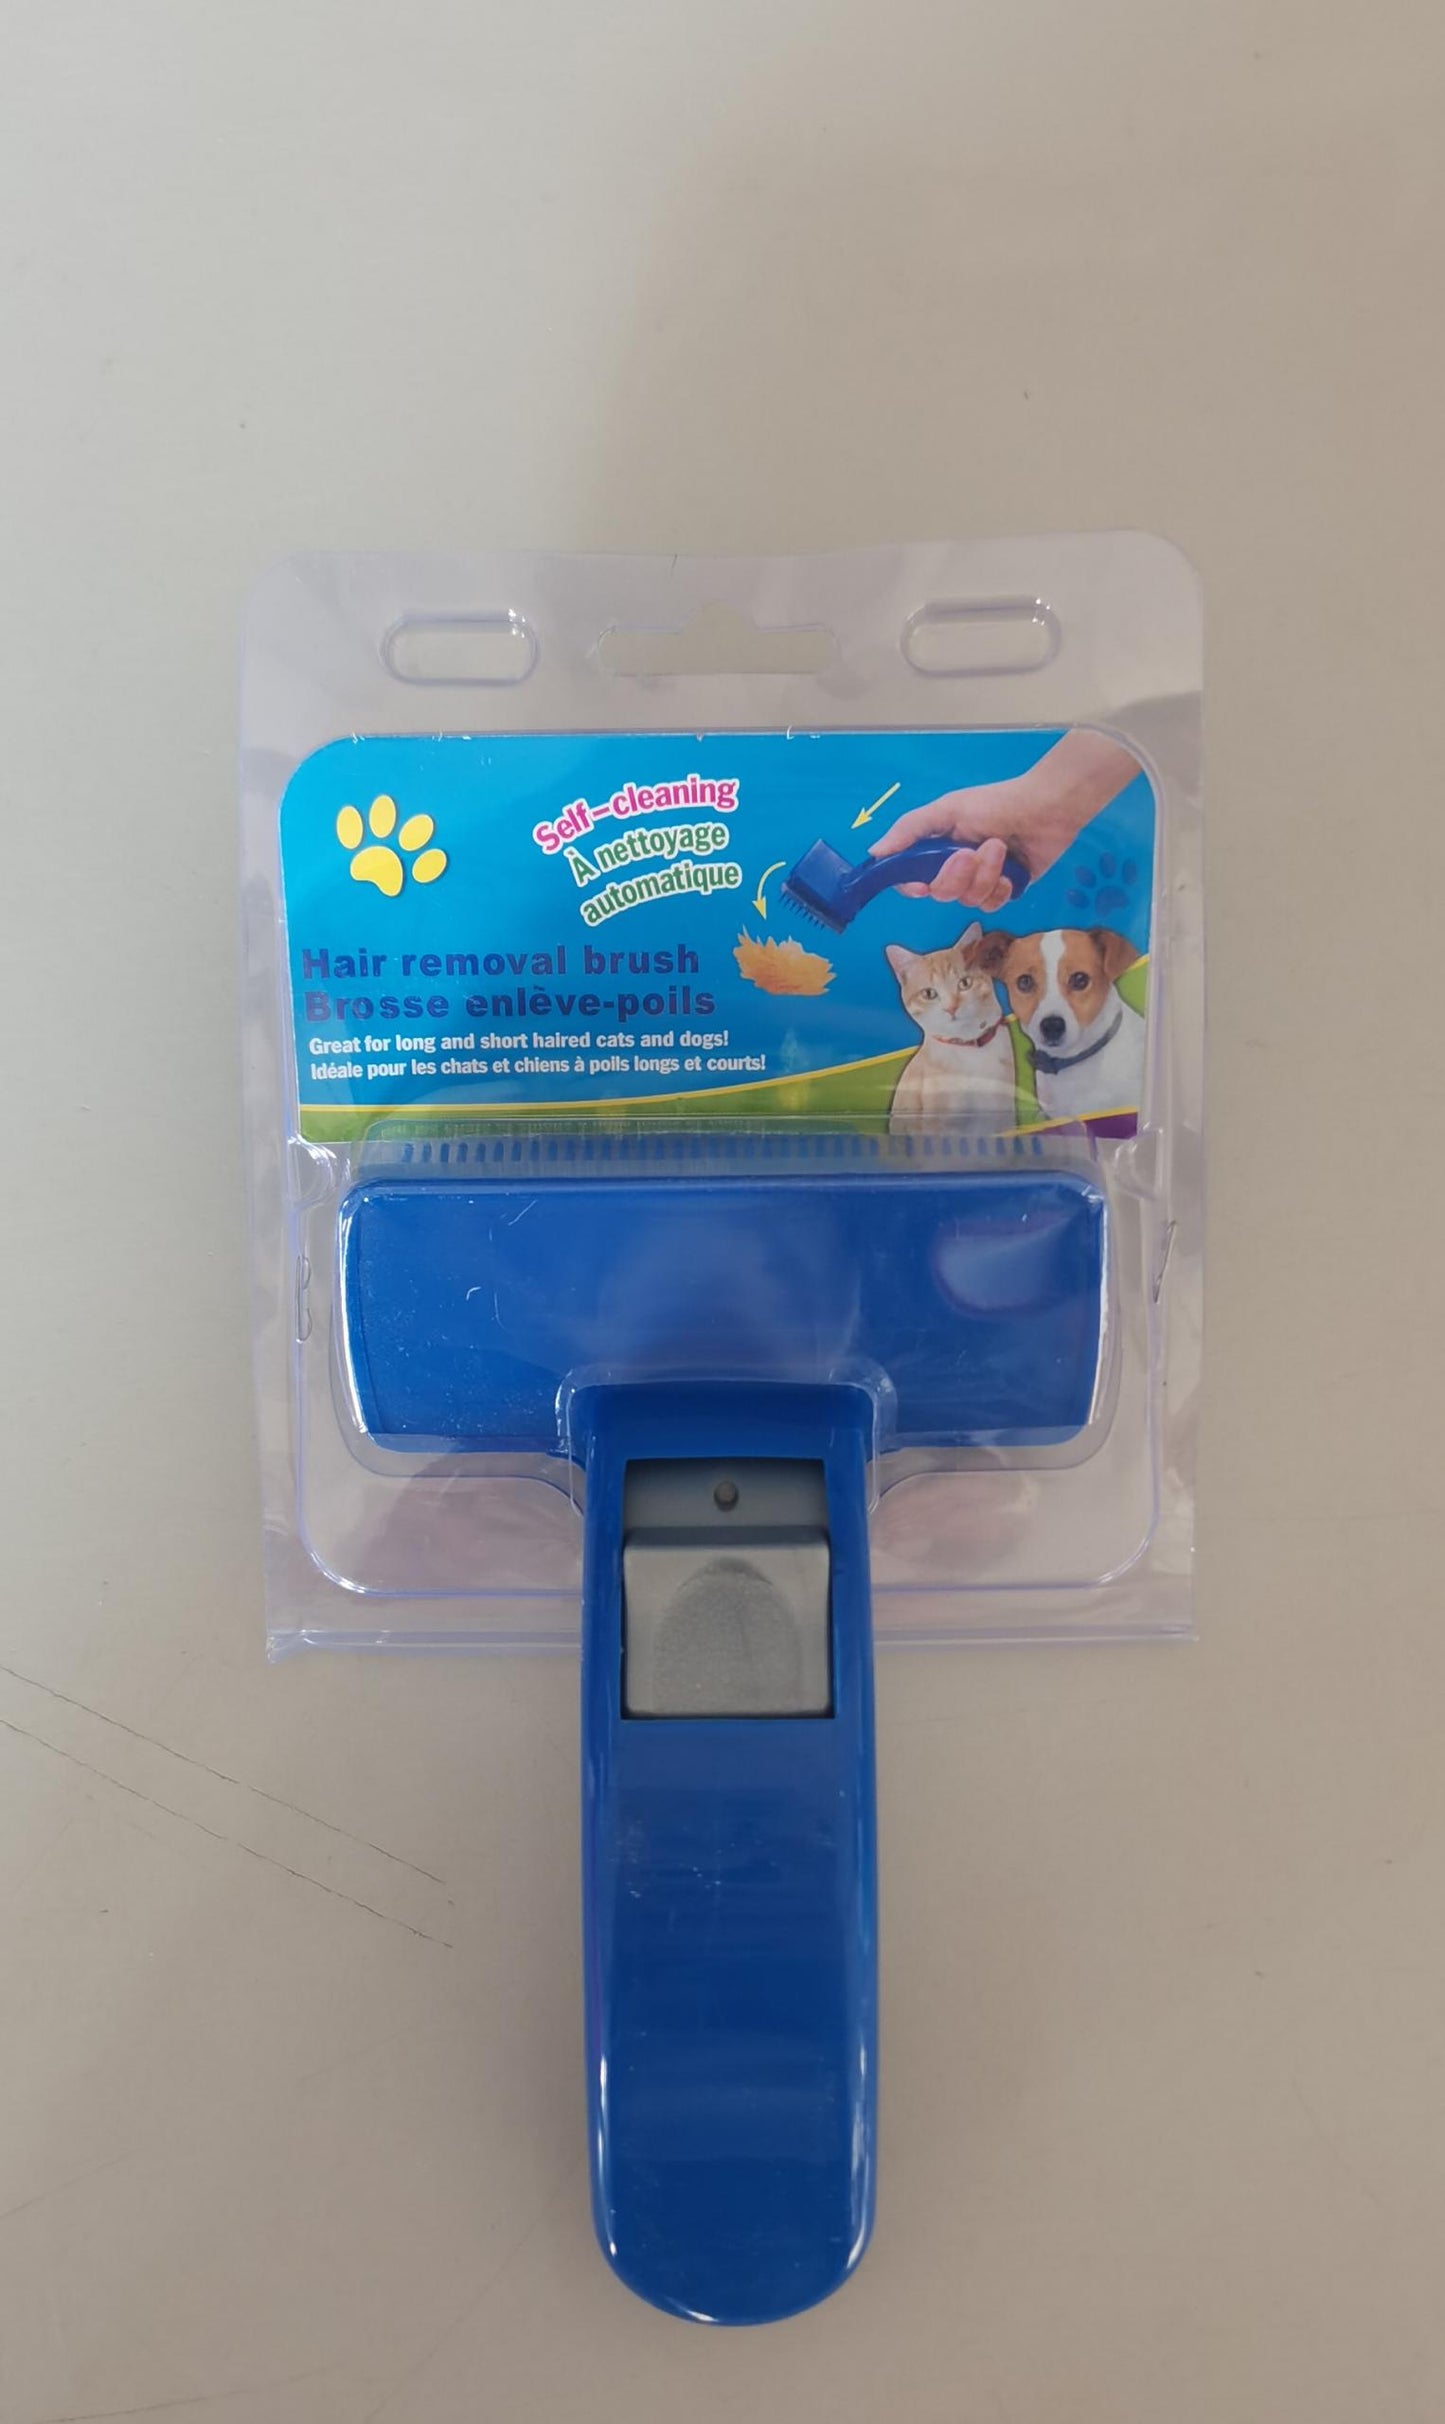 The self-cleaning dog brush is the perfect solution for pet owners who want to keep their dog looking and feeling their best. The brush removes loose hair, dirt, and tangles with ease. Its self-cleaning technology makes hair removal from the brush quick and easy. Its ergonomic design makes brushing a breeze, giving your dog a comfortable grooming experience every time.